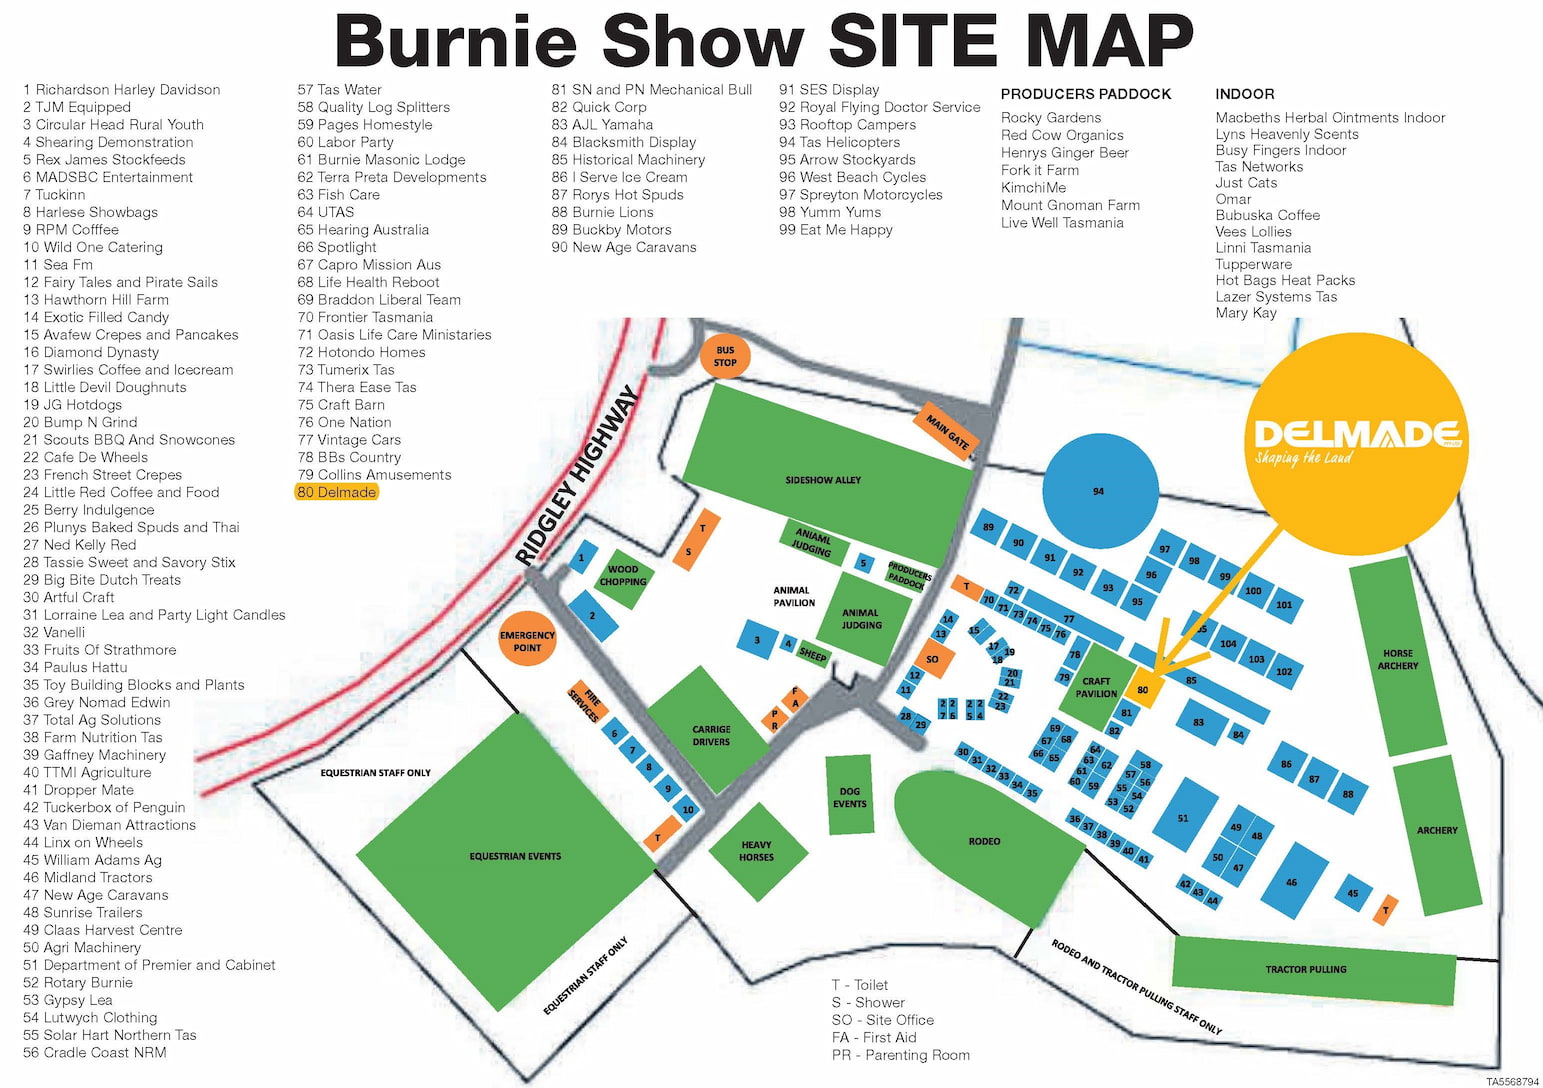 Delmade at the Burnie Show 2019.  Site Map - Delmade Location Site 78 near the Craft Pavilion